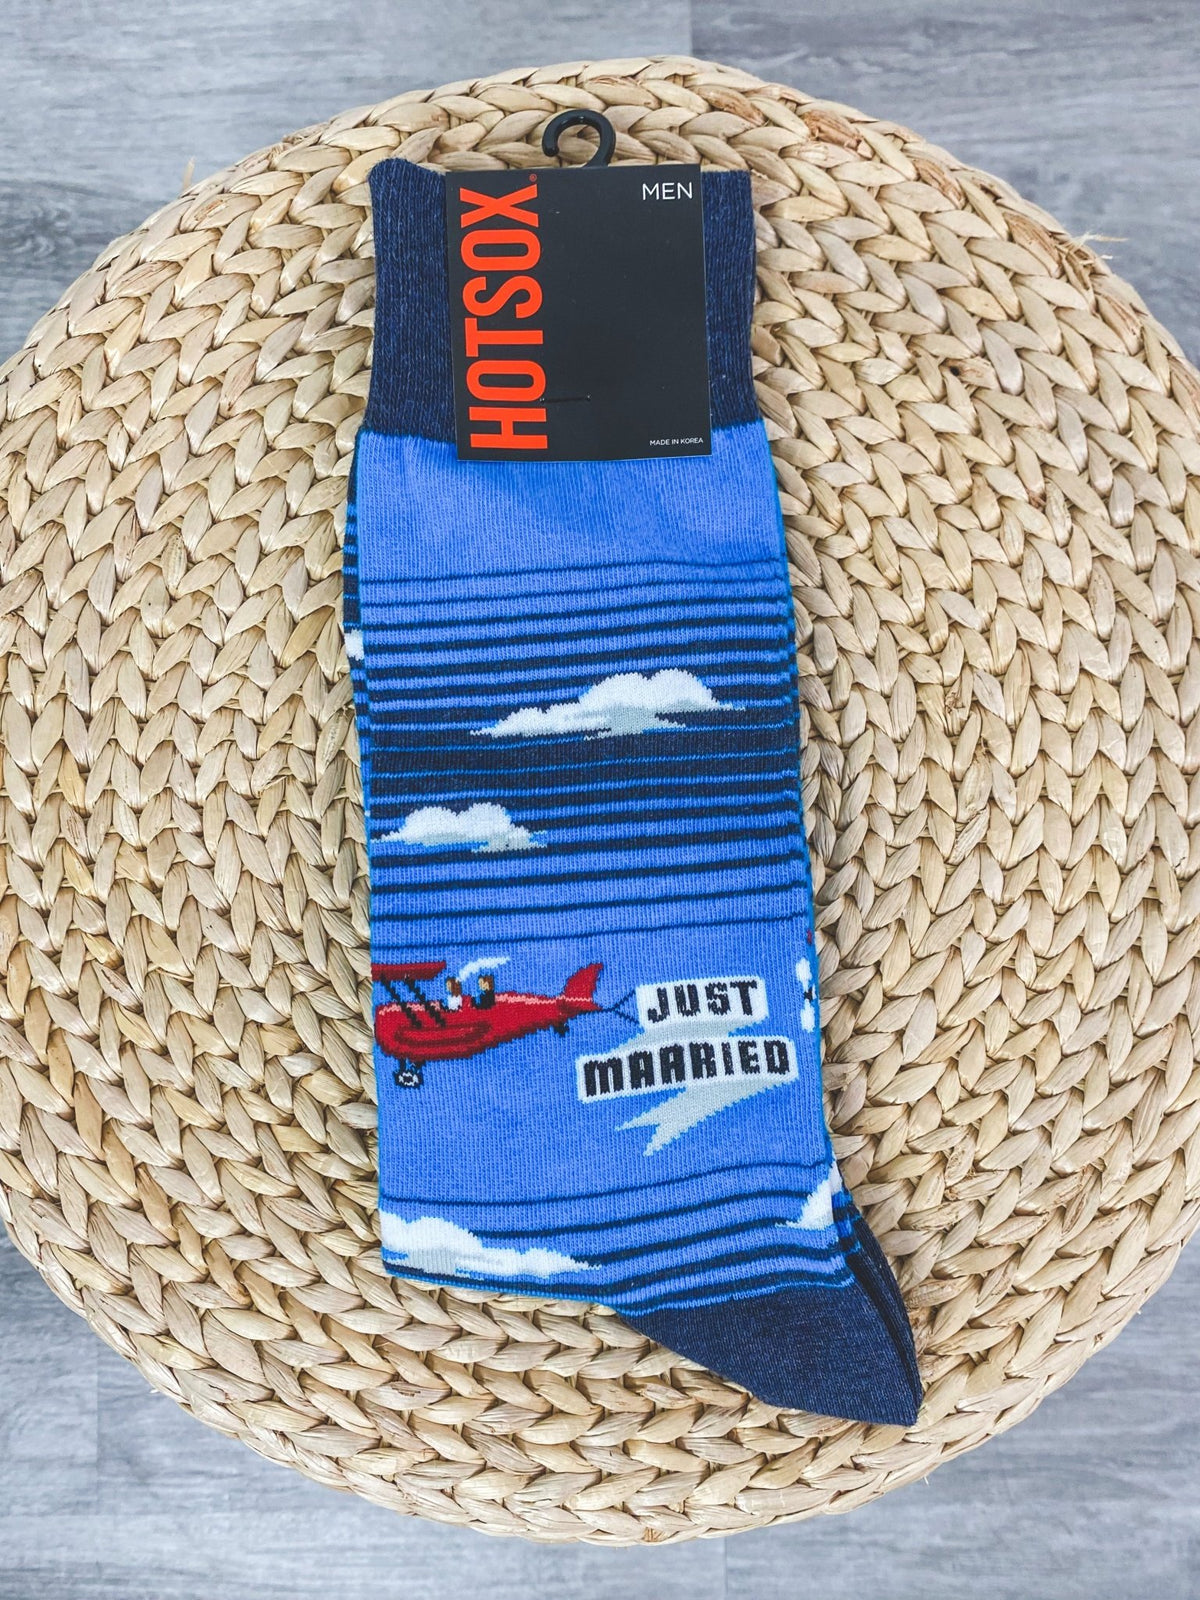 HotSox men's Just Married socks blue - Trendy Socks at Lush Fashion Lounge Boutique in Oklahoma City